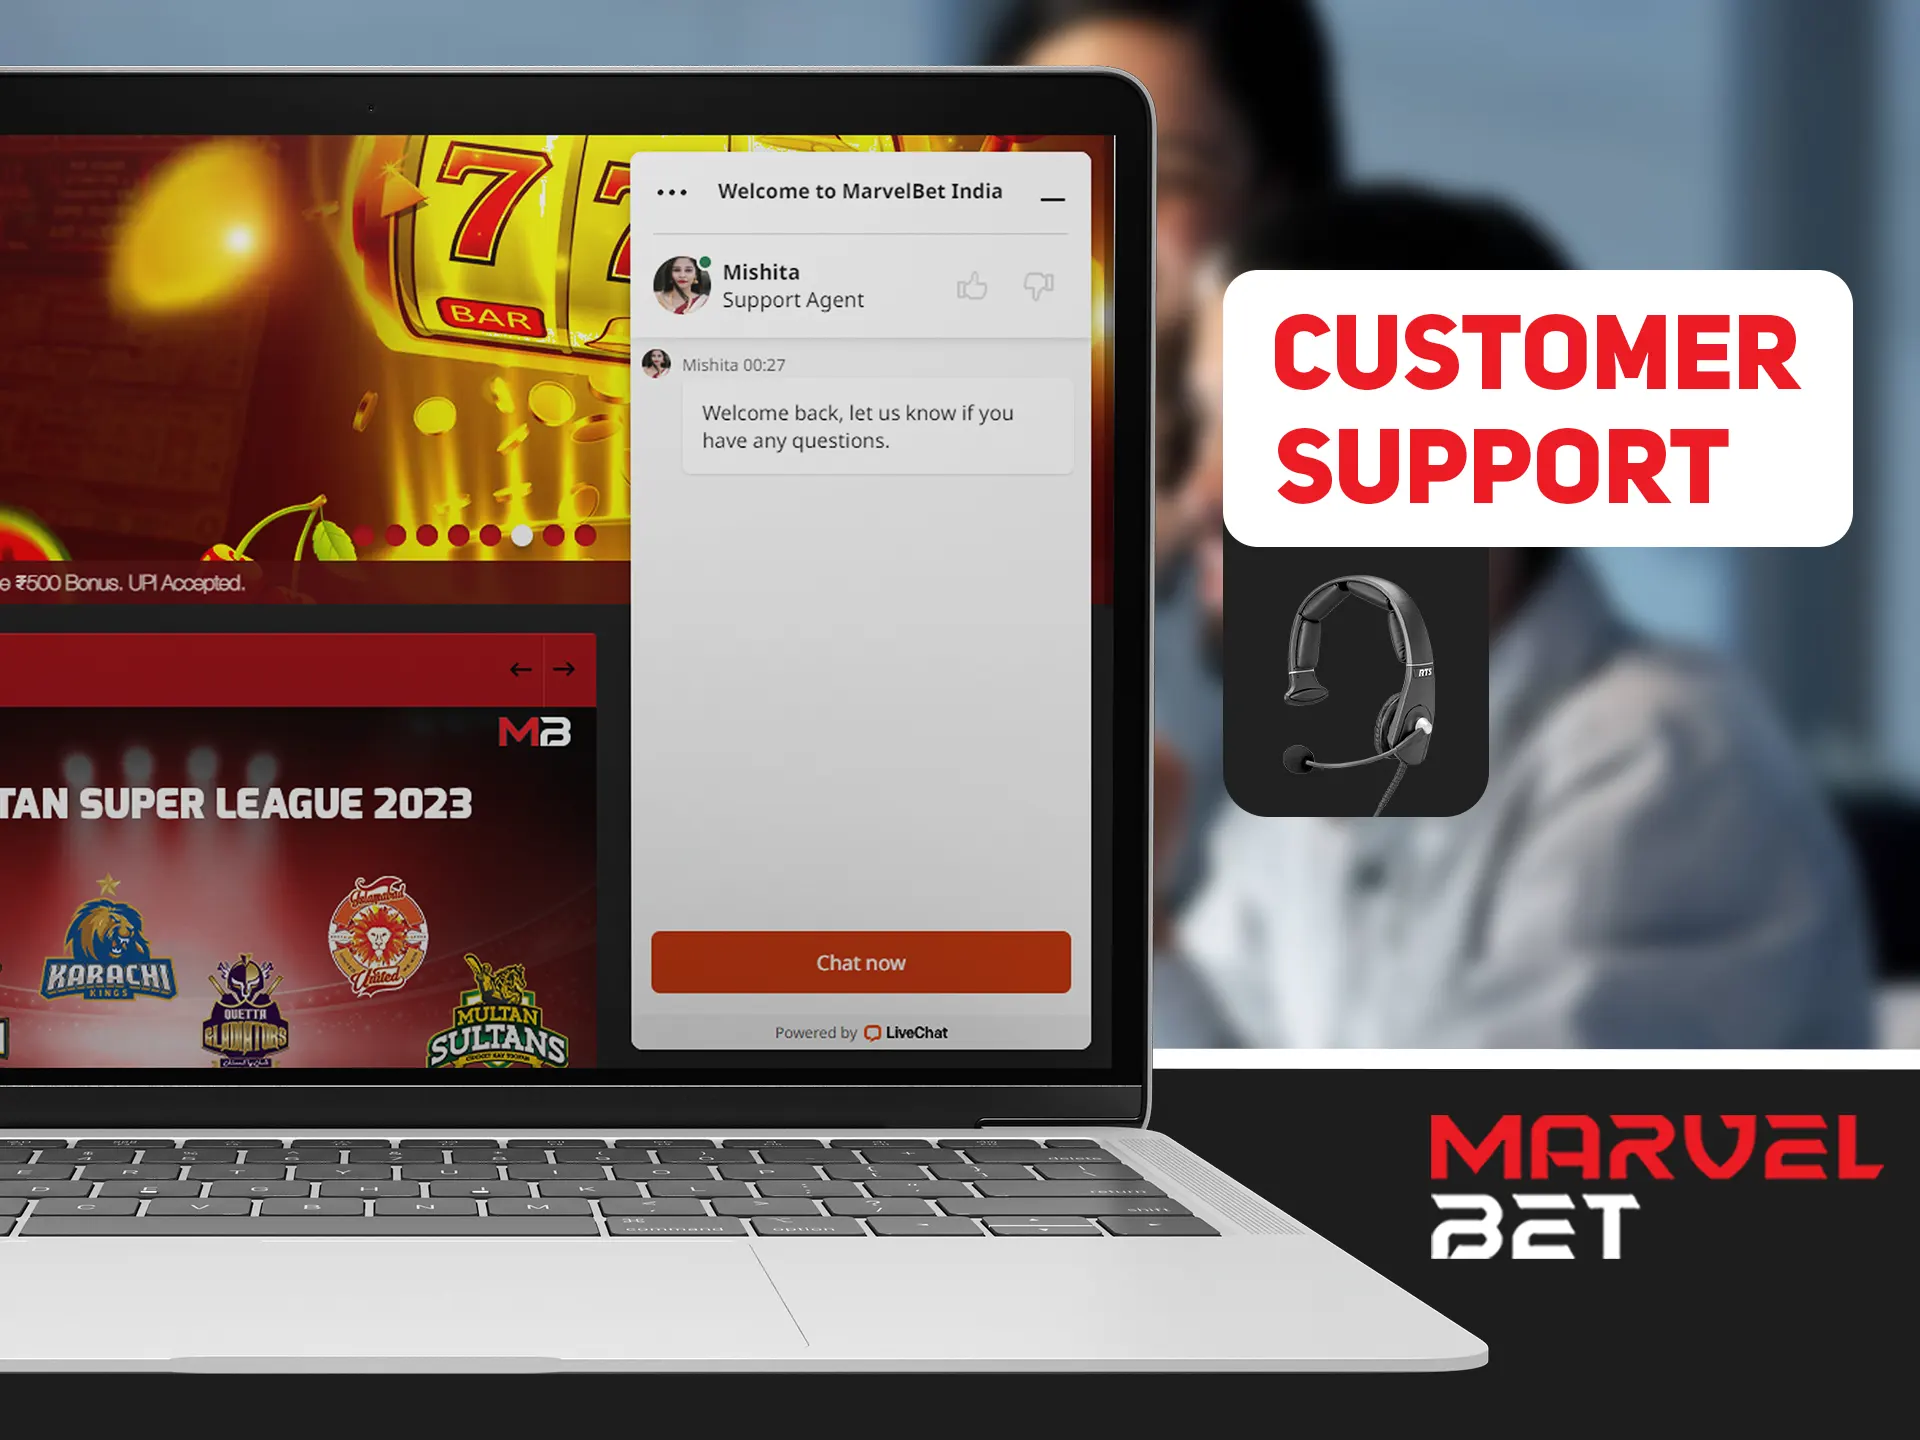 Ask for help Marvelbet customer support.